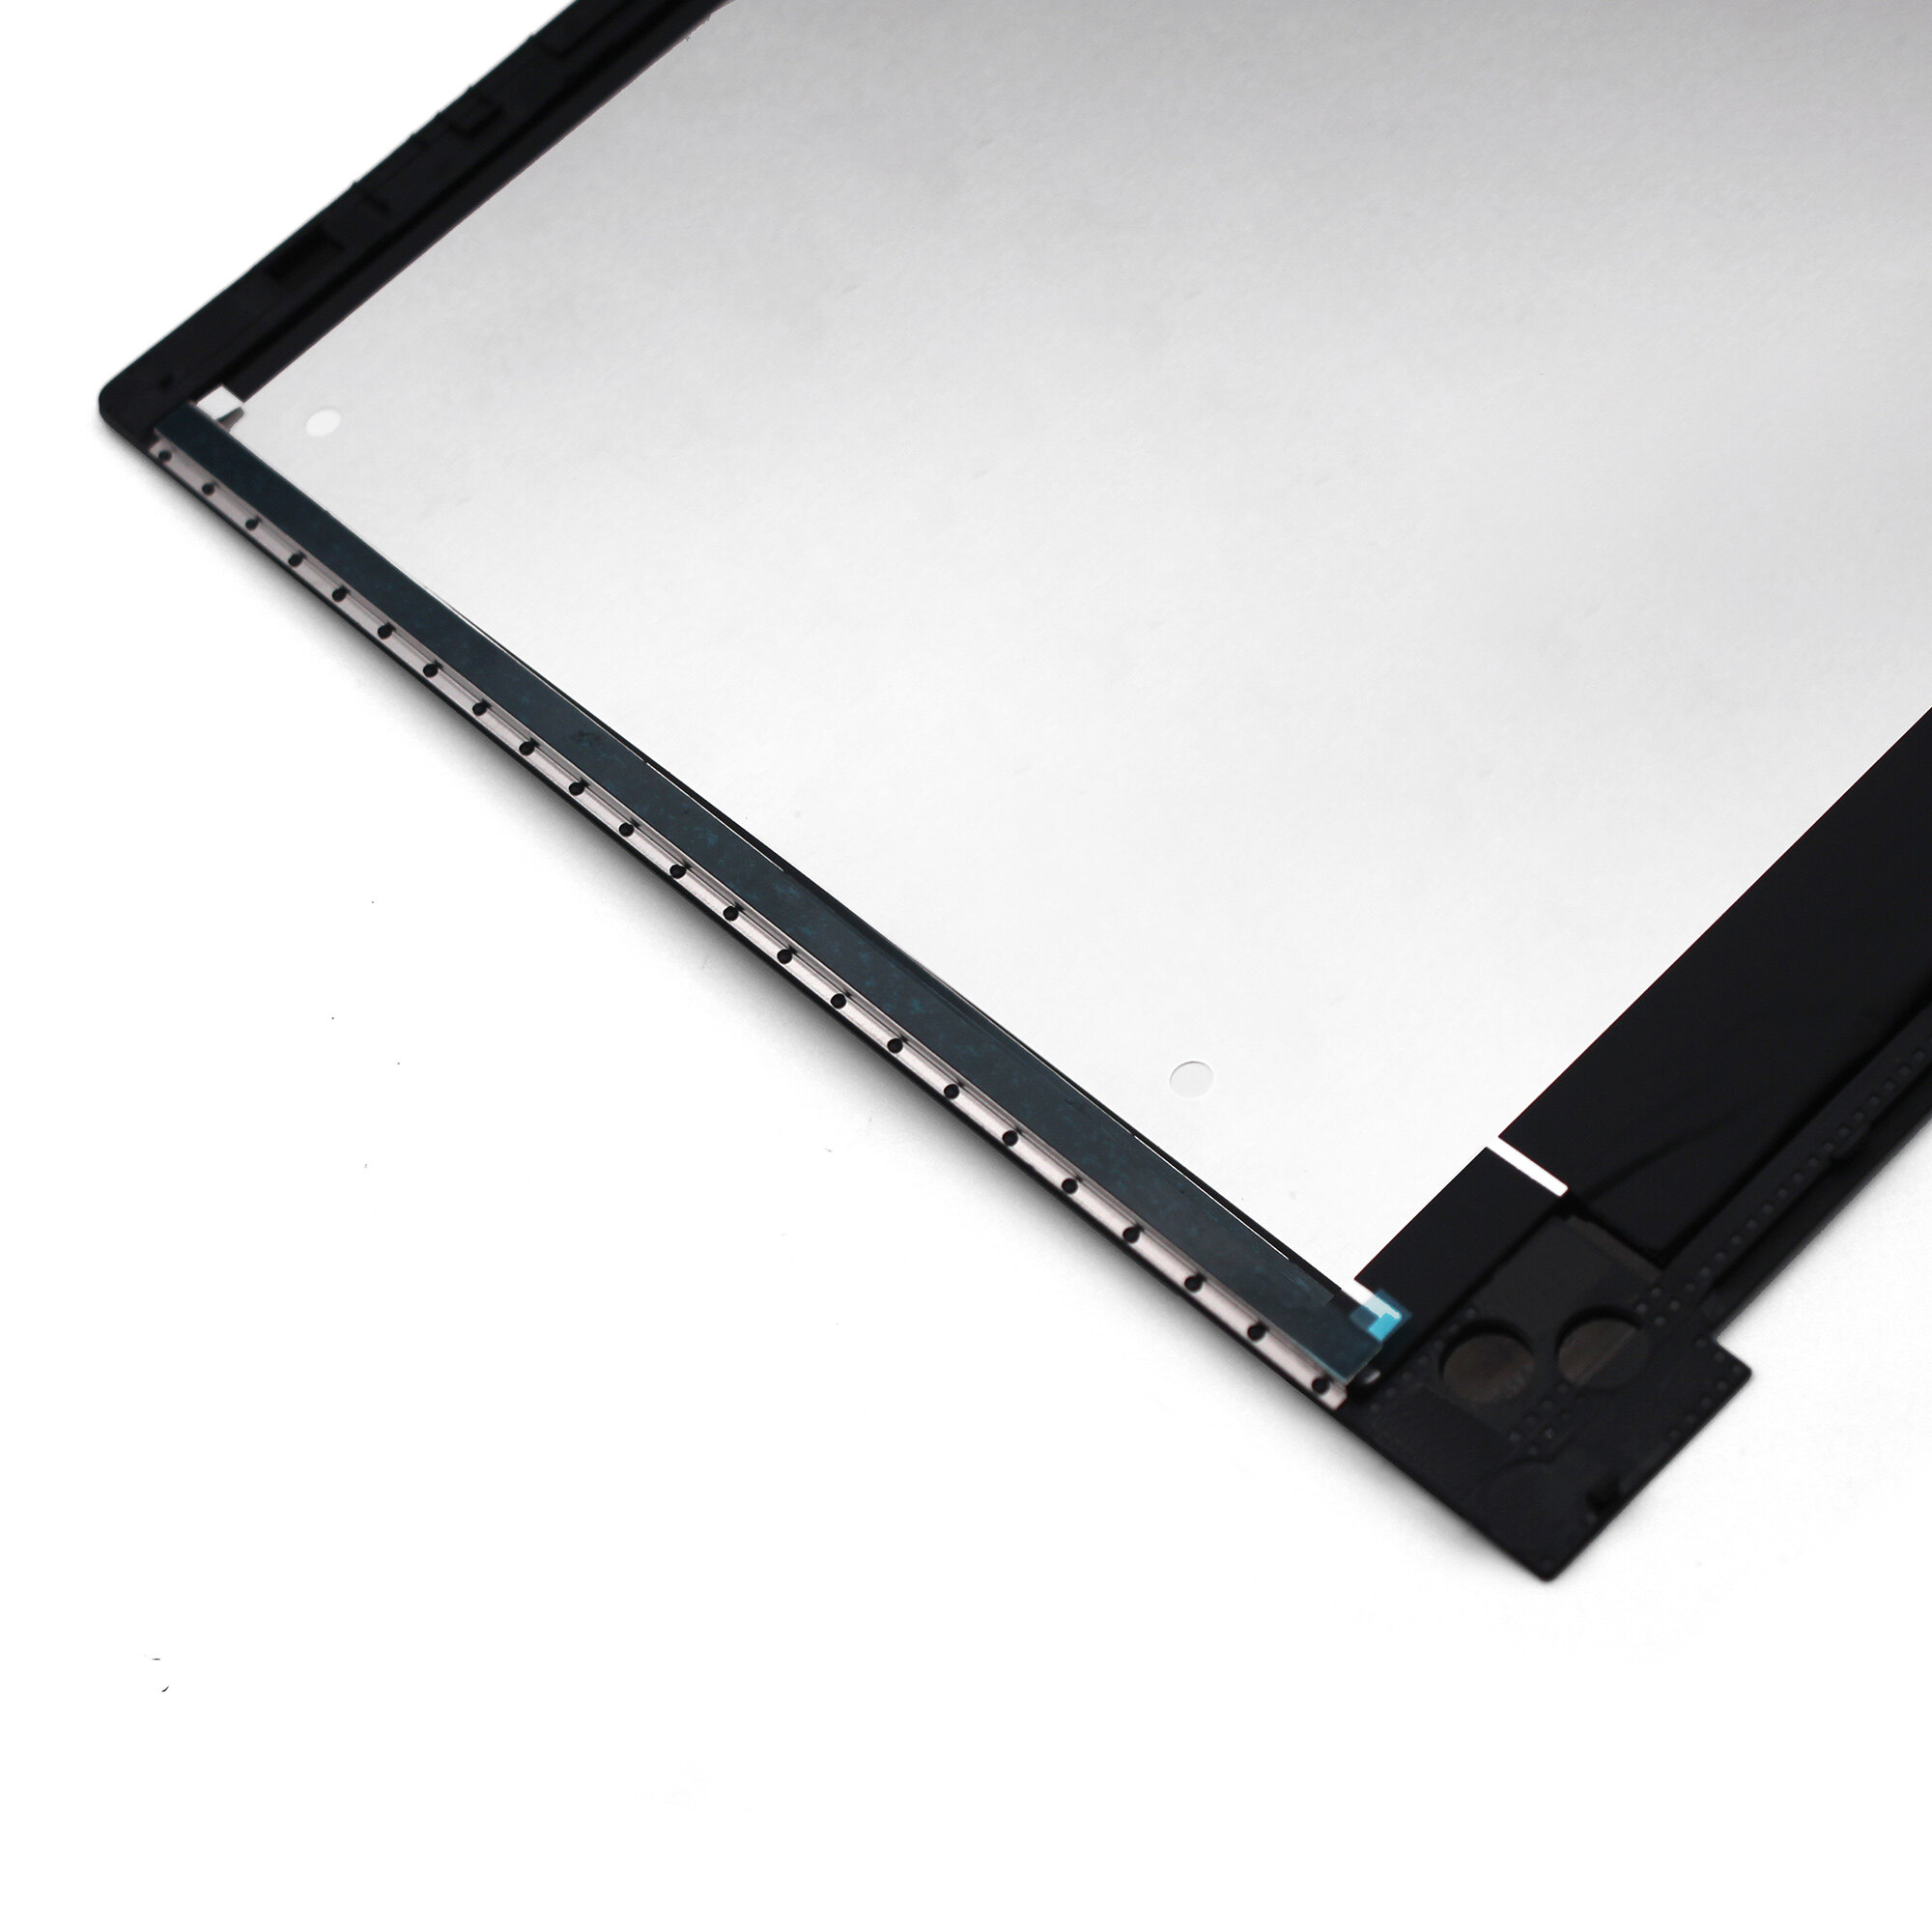 Kreplacement LCD Display Touch Screen Digitizer Assembly+Control Board+Bezel For HP ENVY x360 13-ag0001na 13-ag0001ns 13-ag0002na 13-ag0002ns